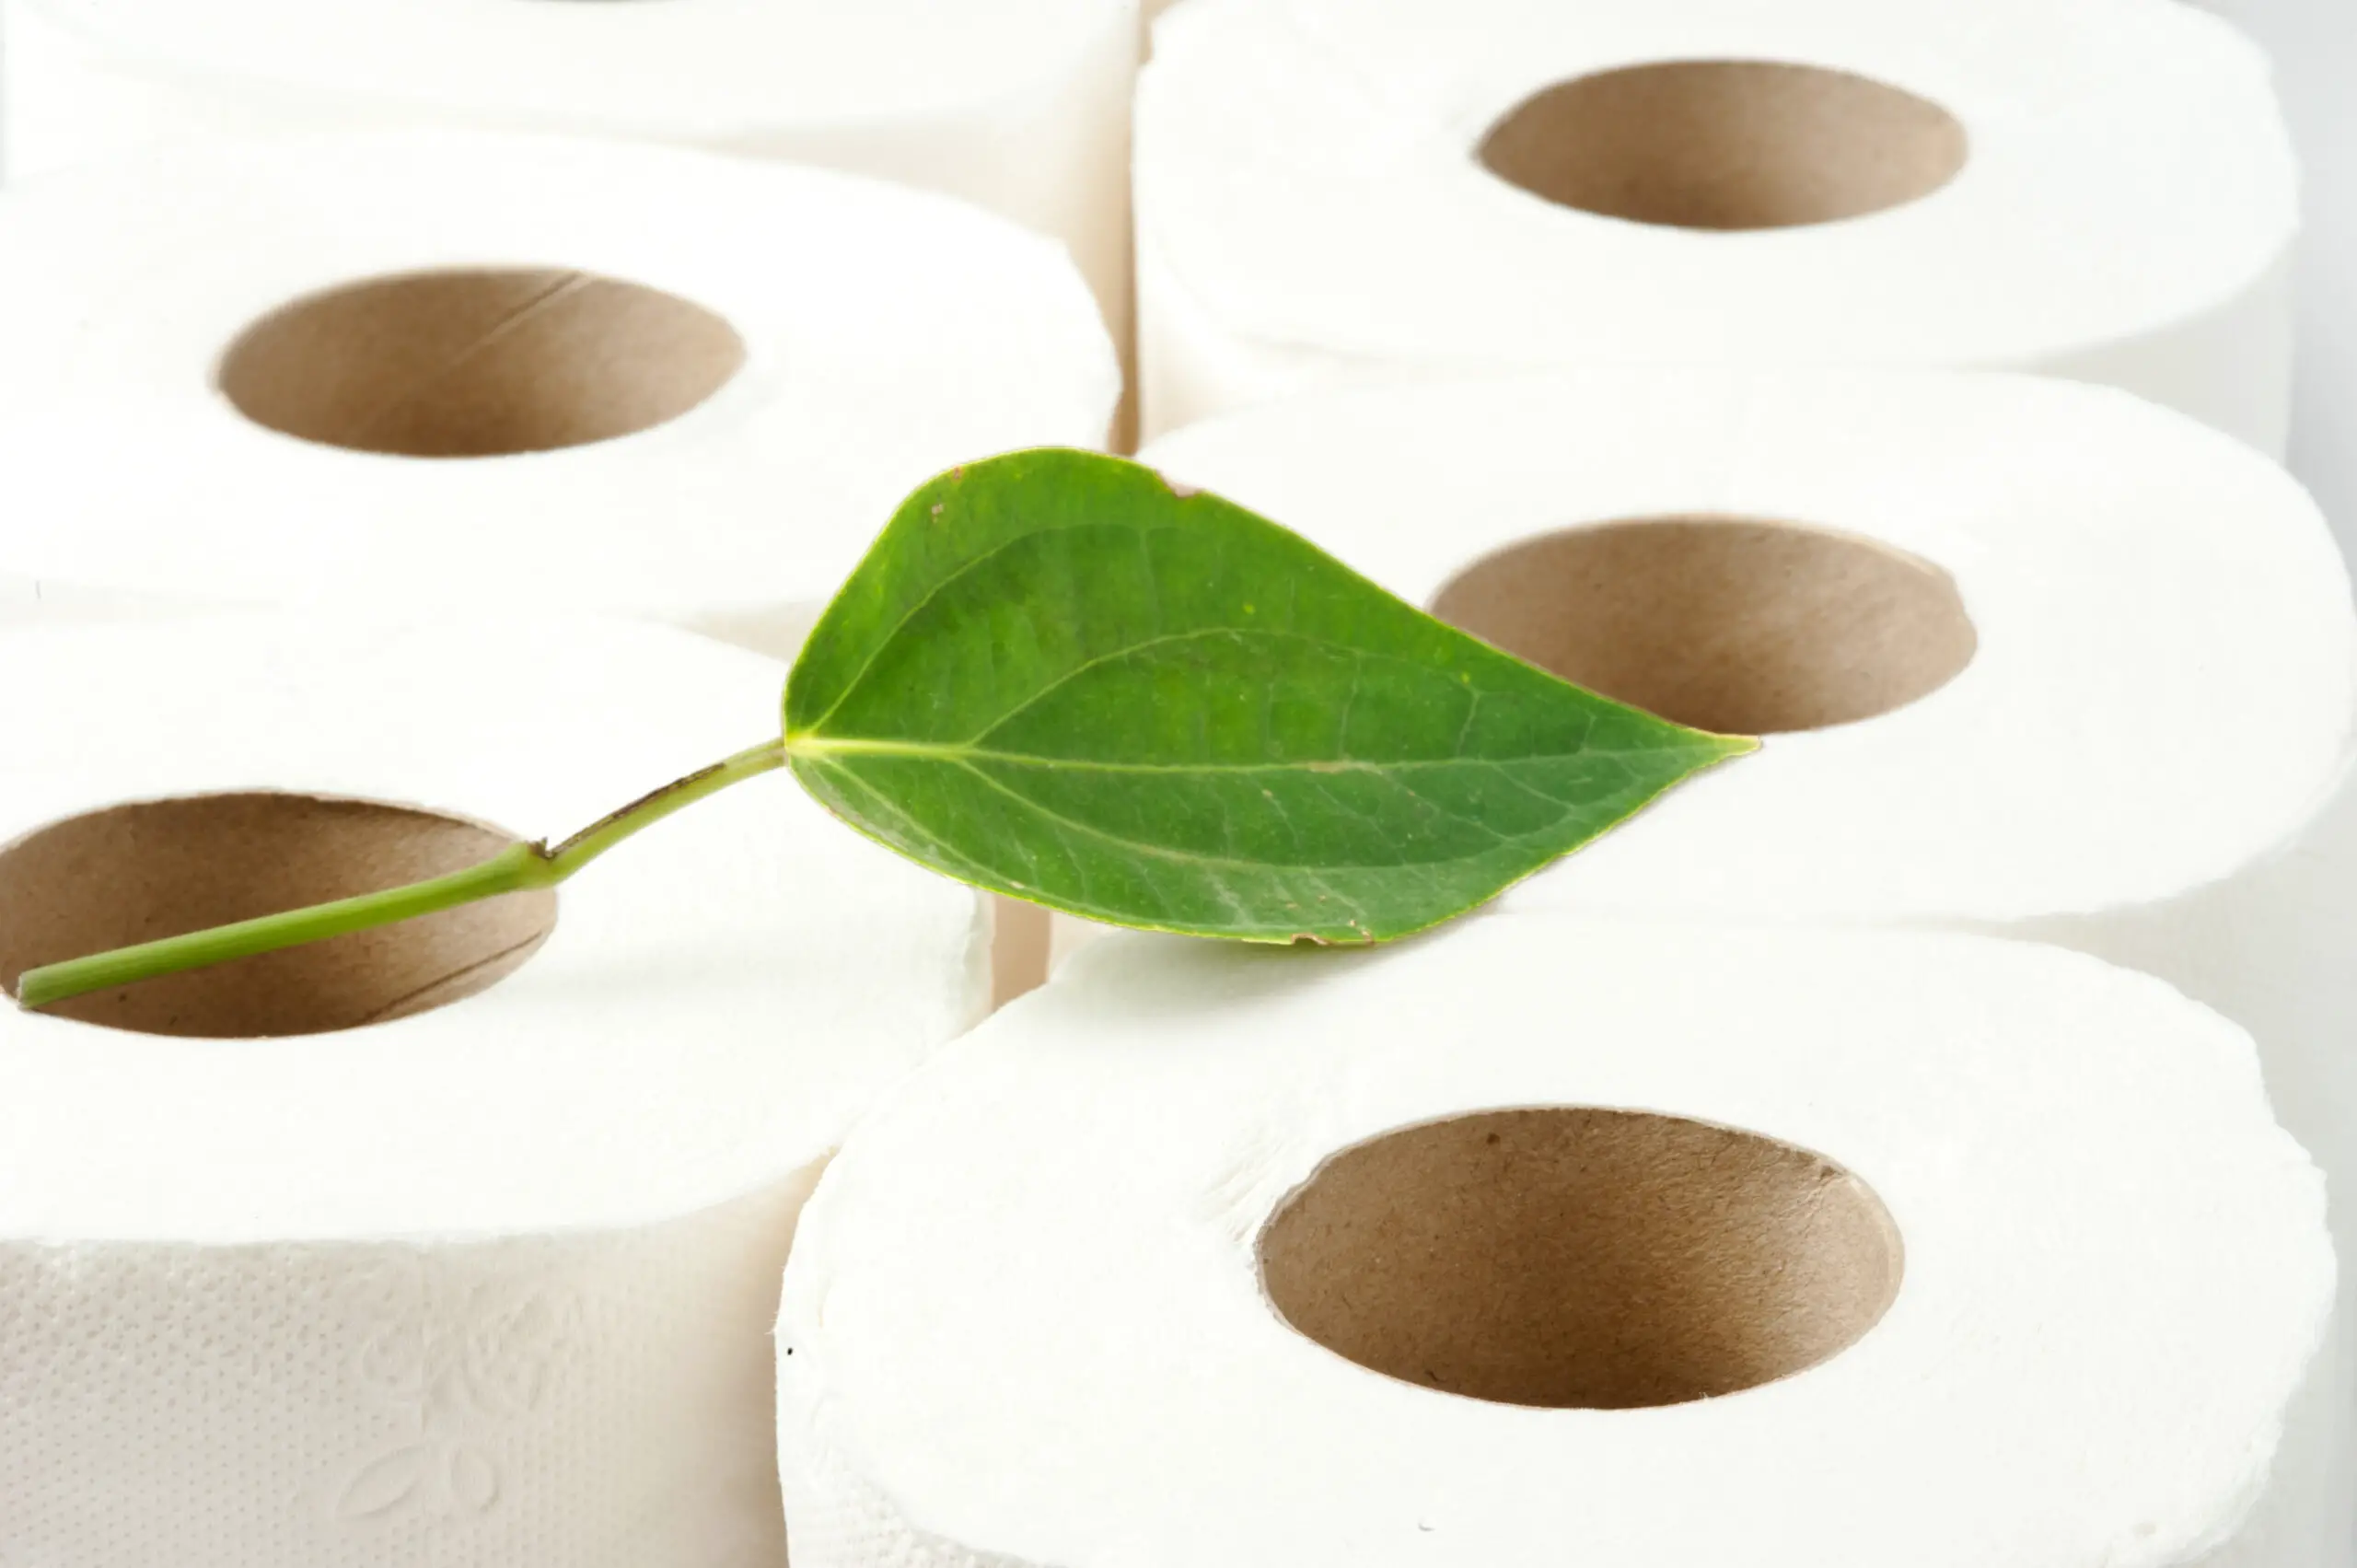 rolls of toilet paper with the leaf